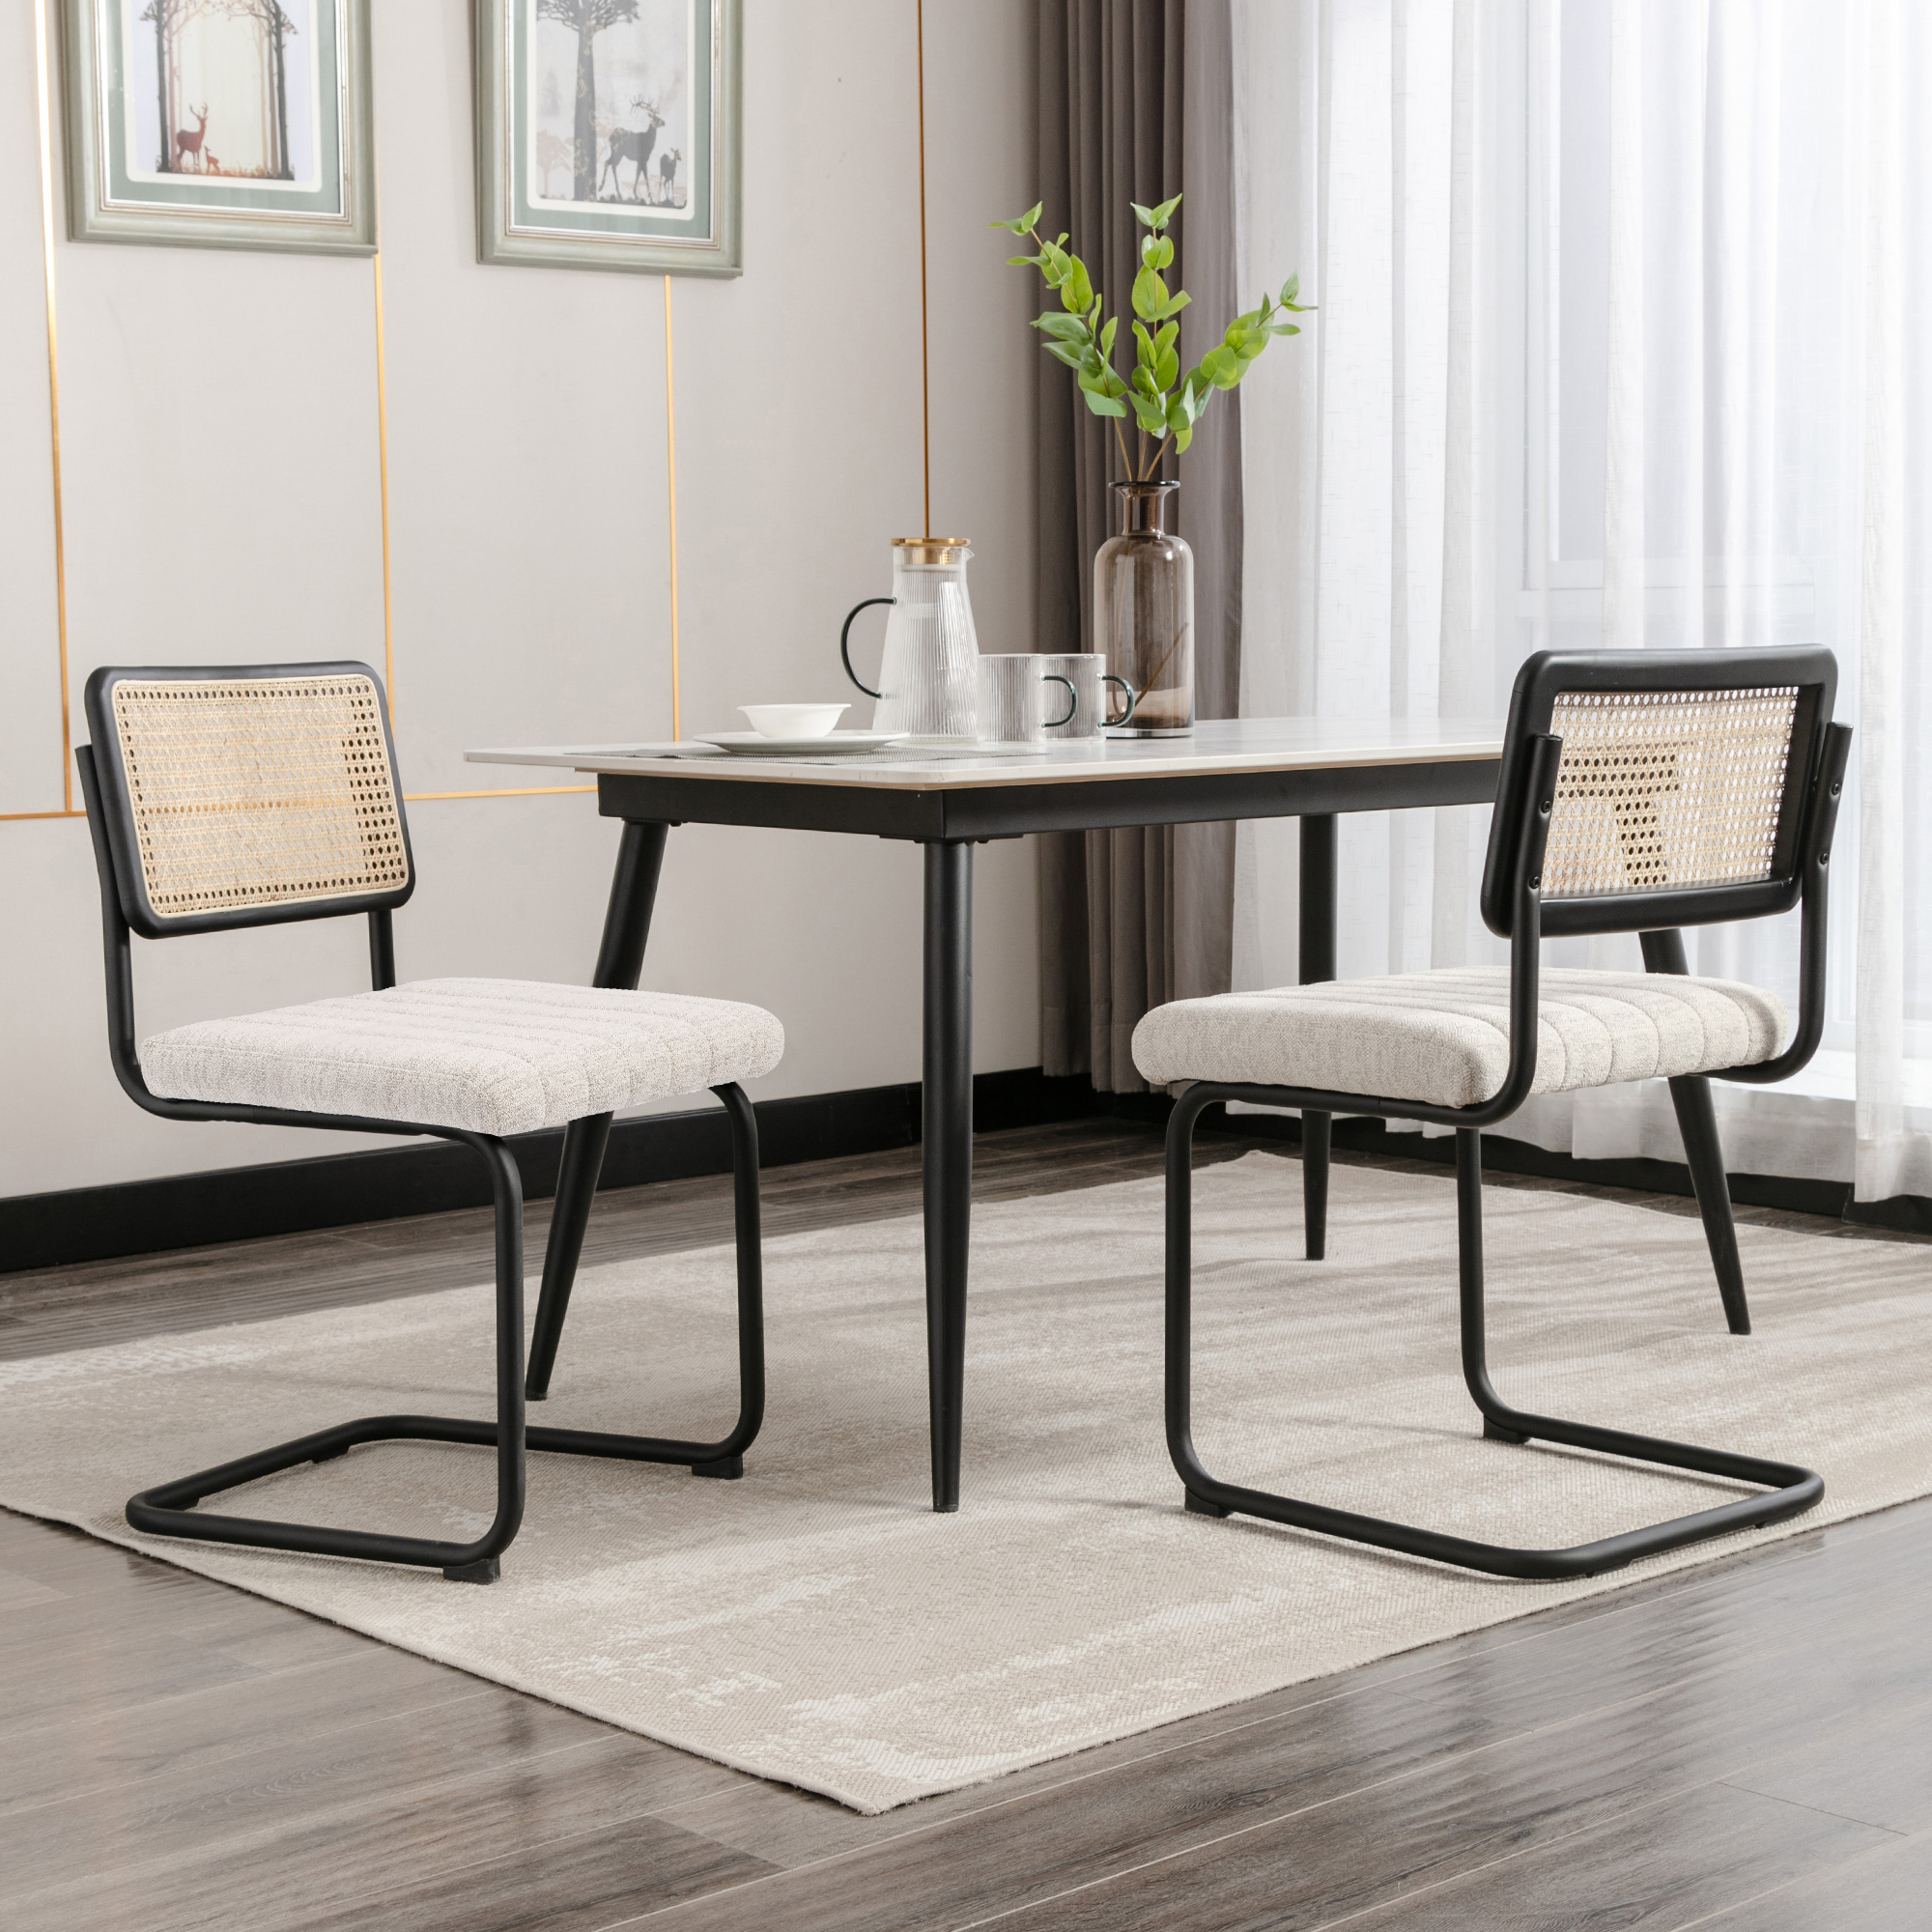 Zesthouse Beige Linen Dining Chairs Set of 2, Rattan Upholstered Kitchen Chairs with Cane Back and Black Metal Legs, Mid-Century Modern Side Chair for Dining Living Room - image 2 of 13